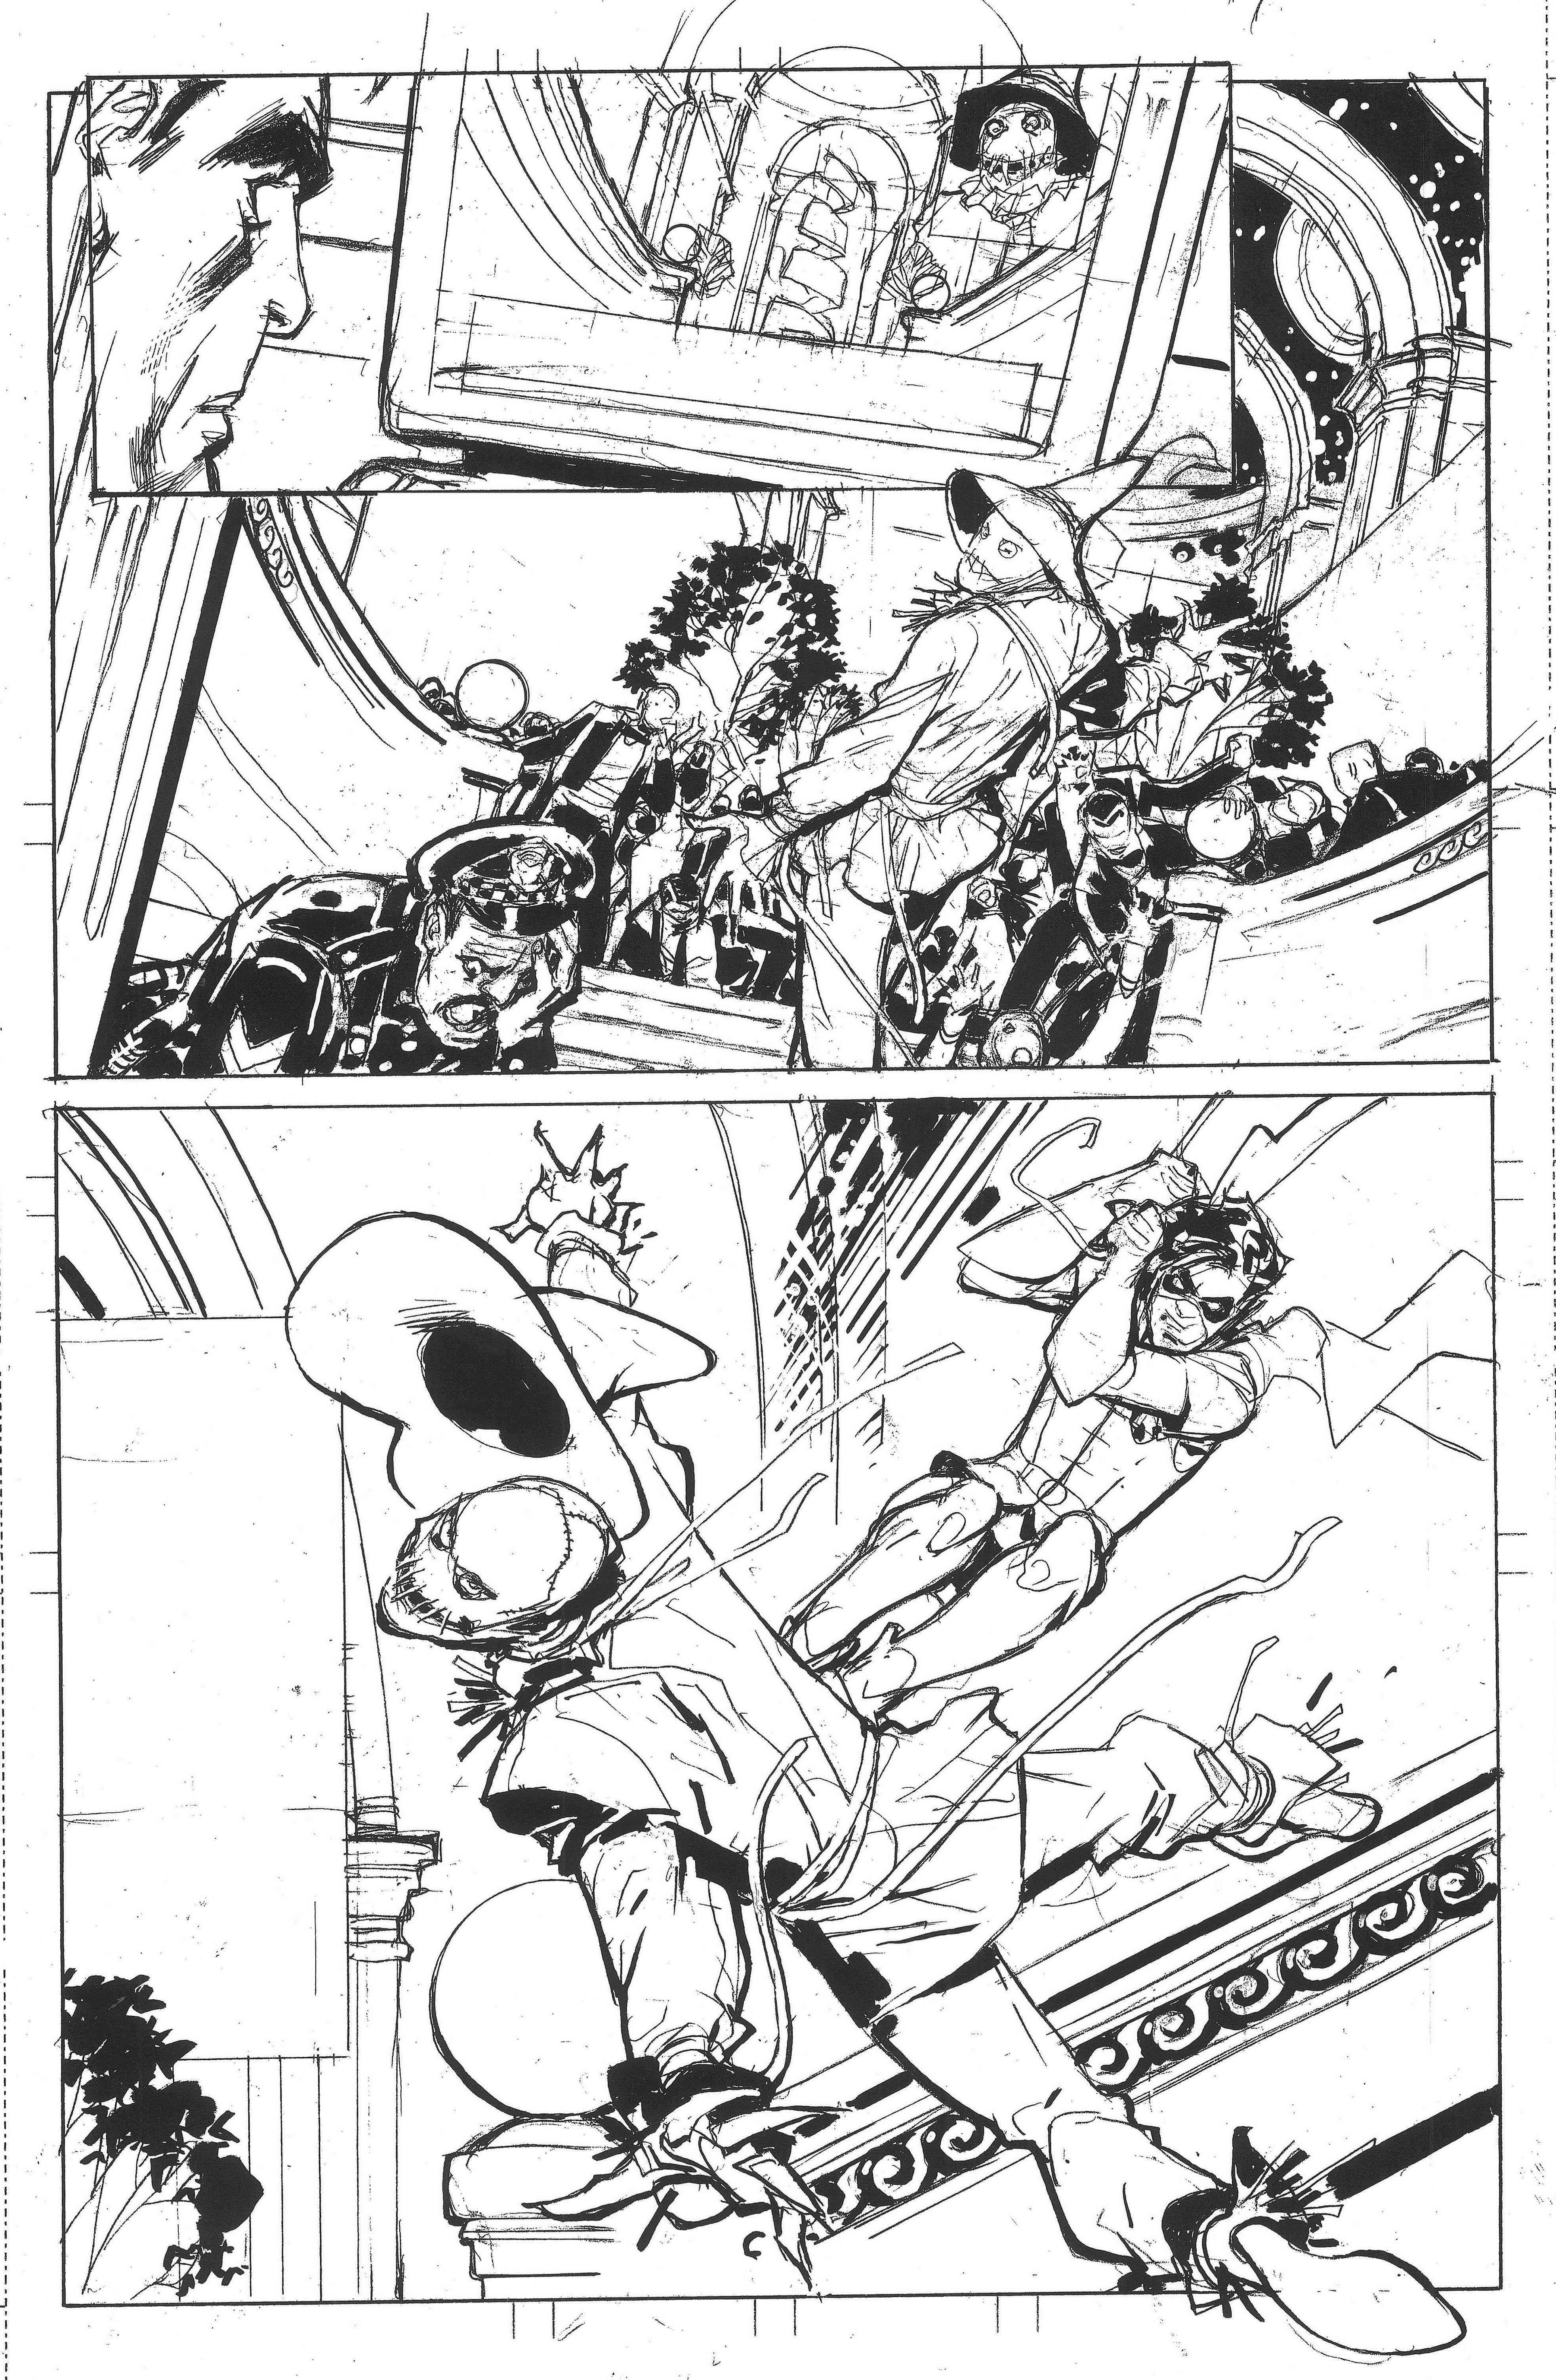 from-the-dc-vault-pencils2.jpg